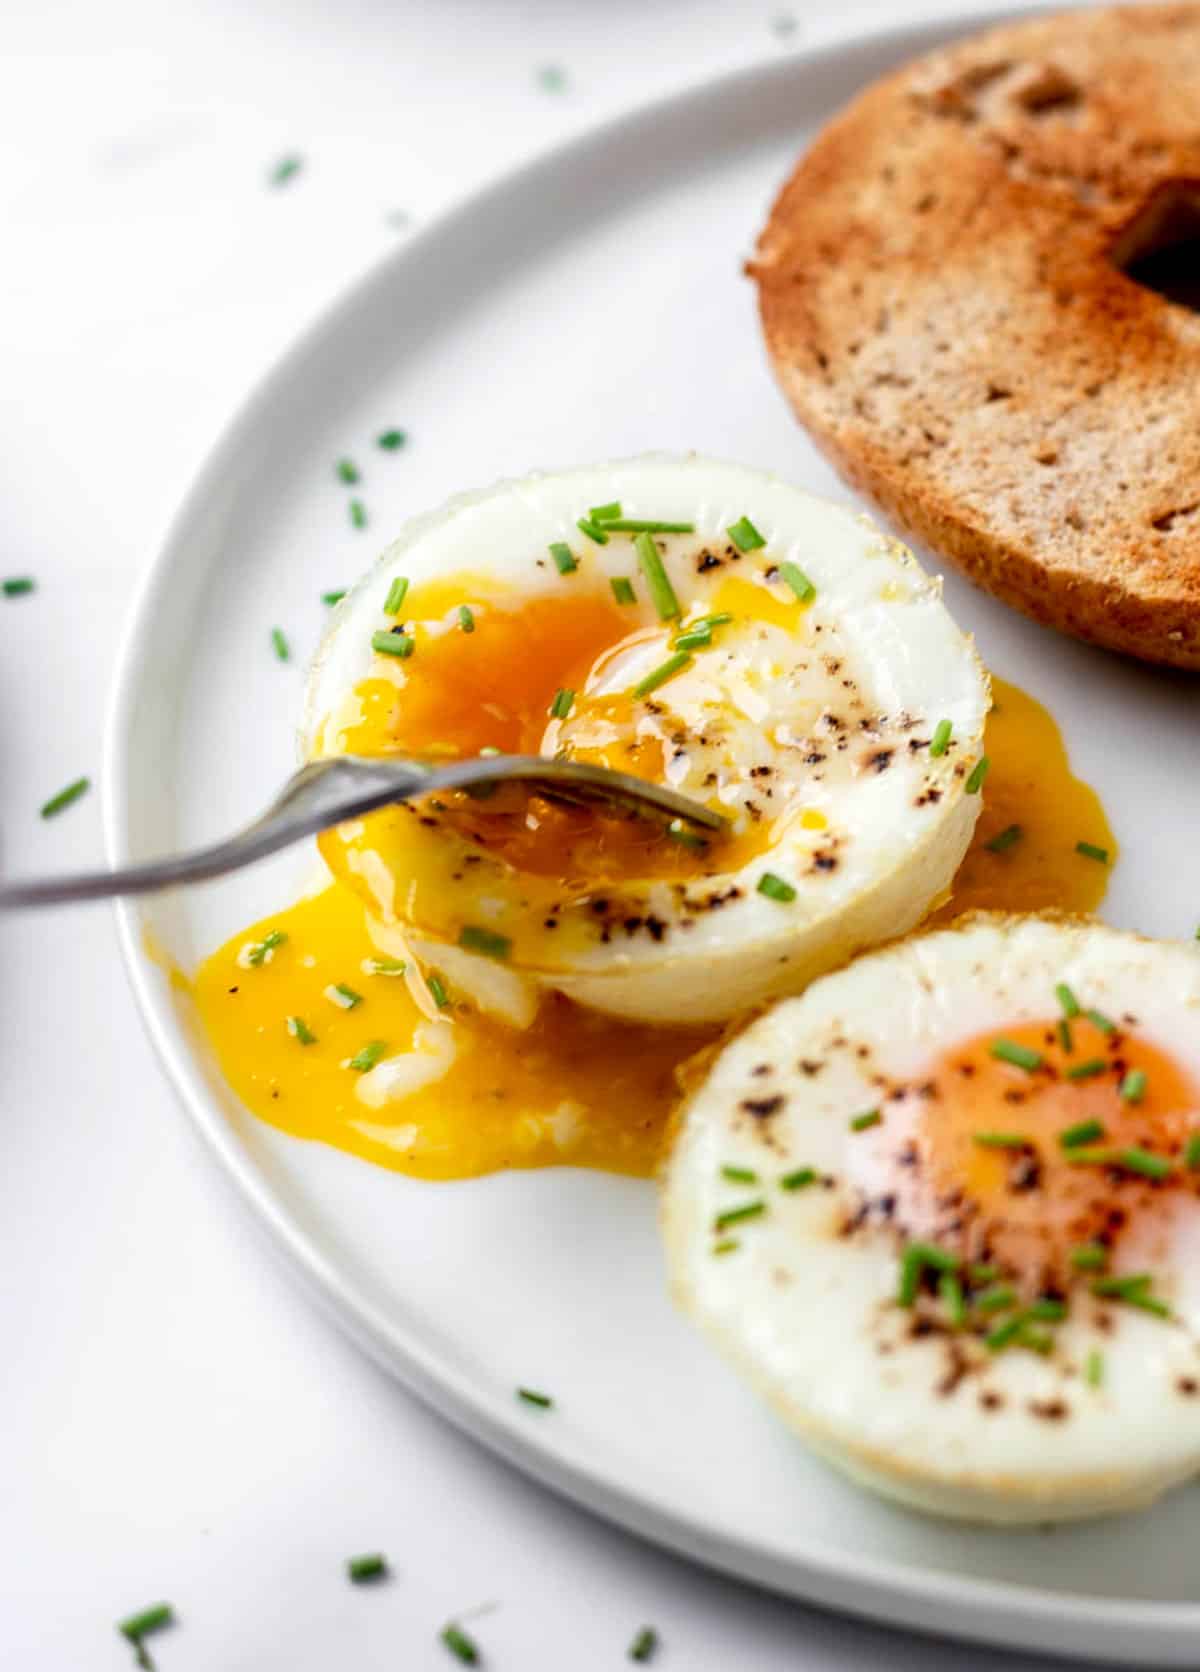 A fork poking into a baked egg with yolk running out.